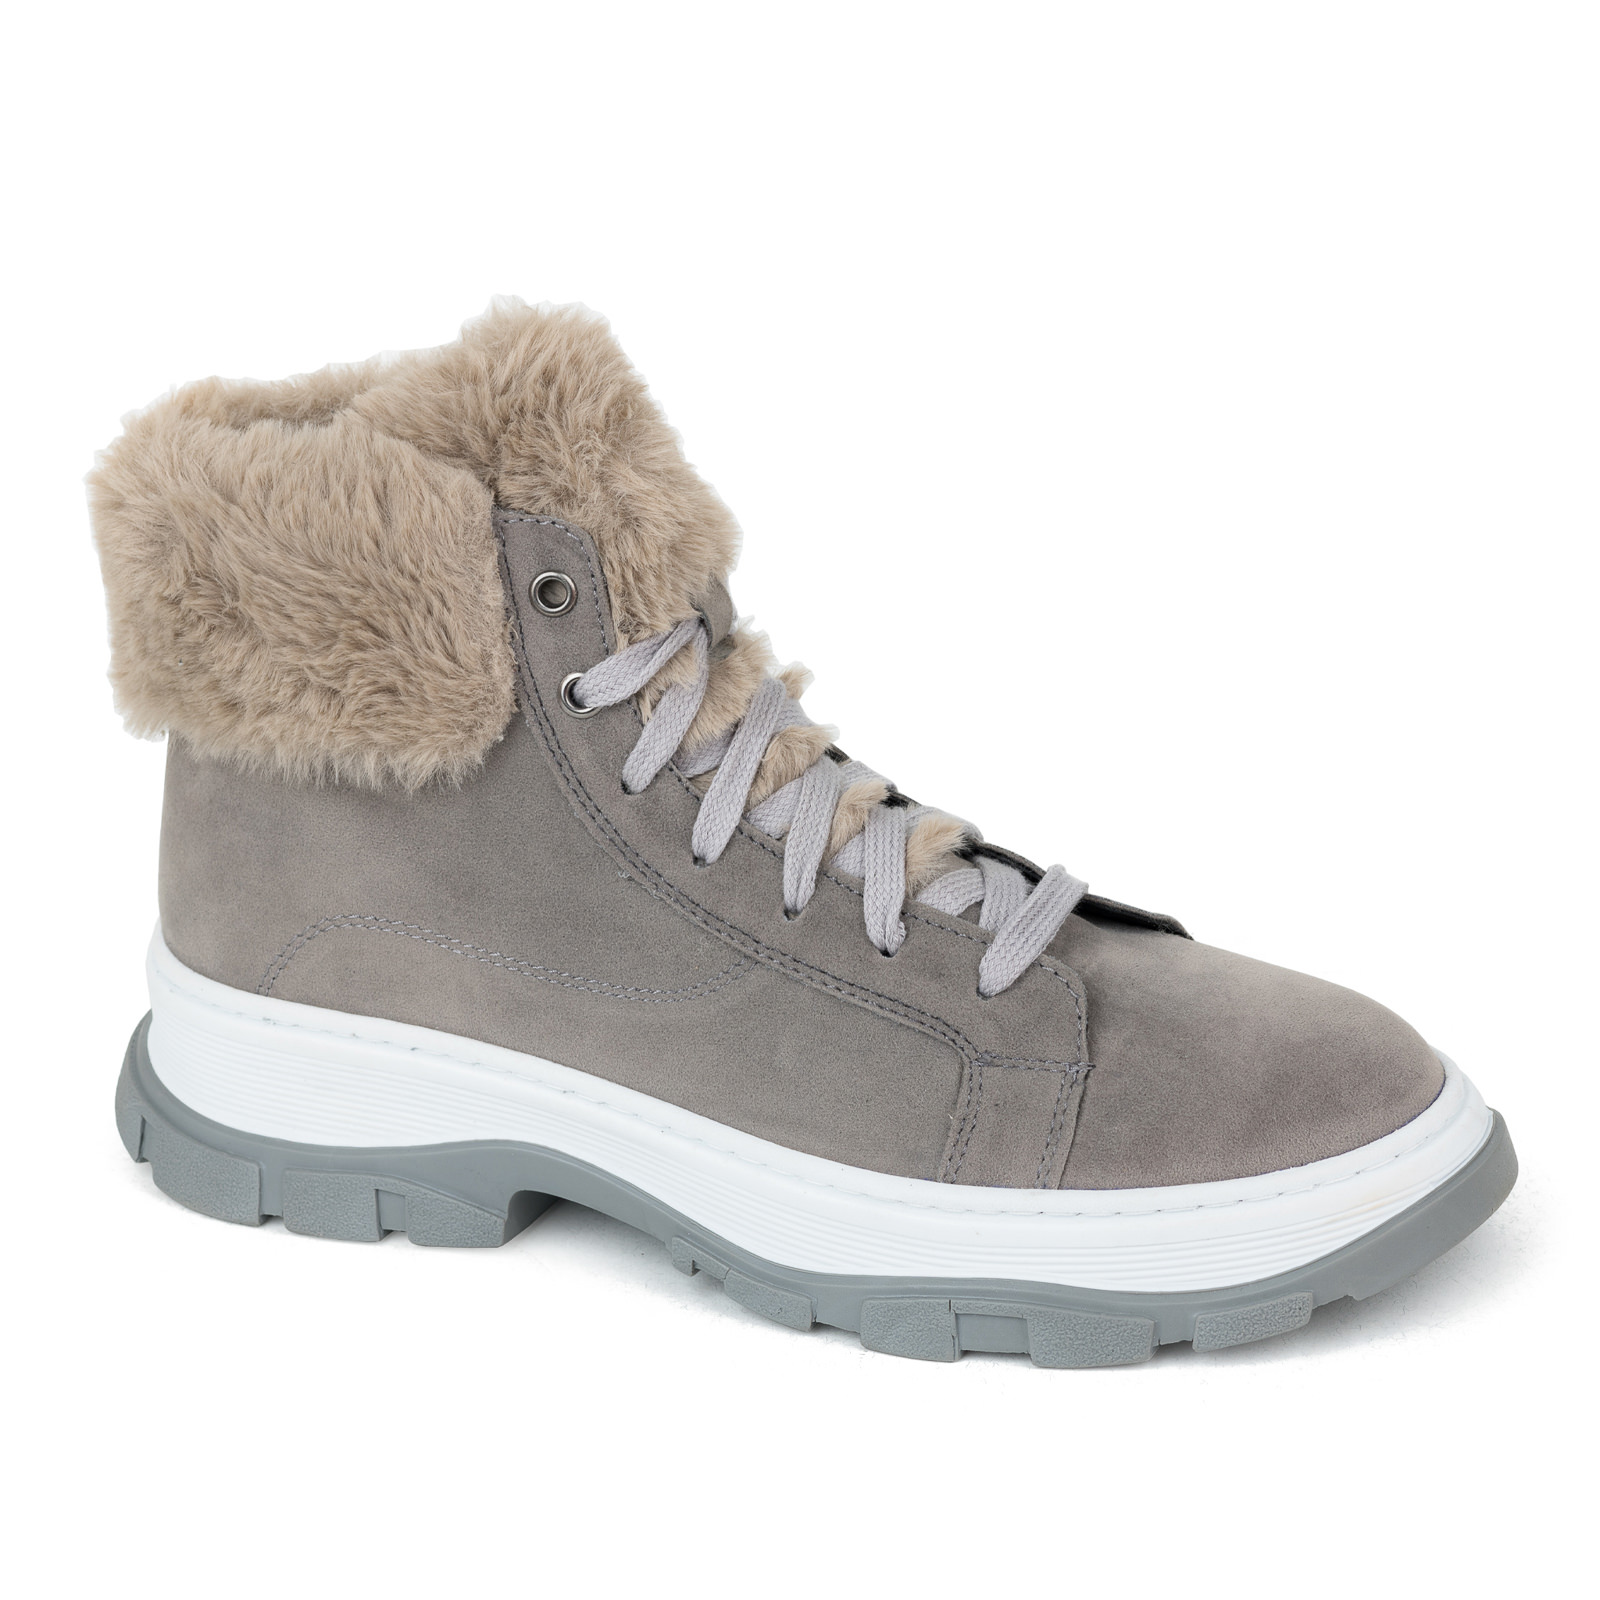 Women ankle boots B473 - GREY